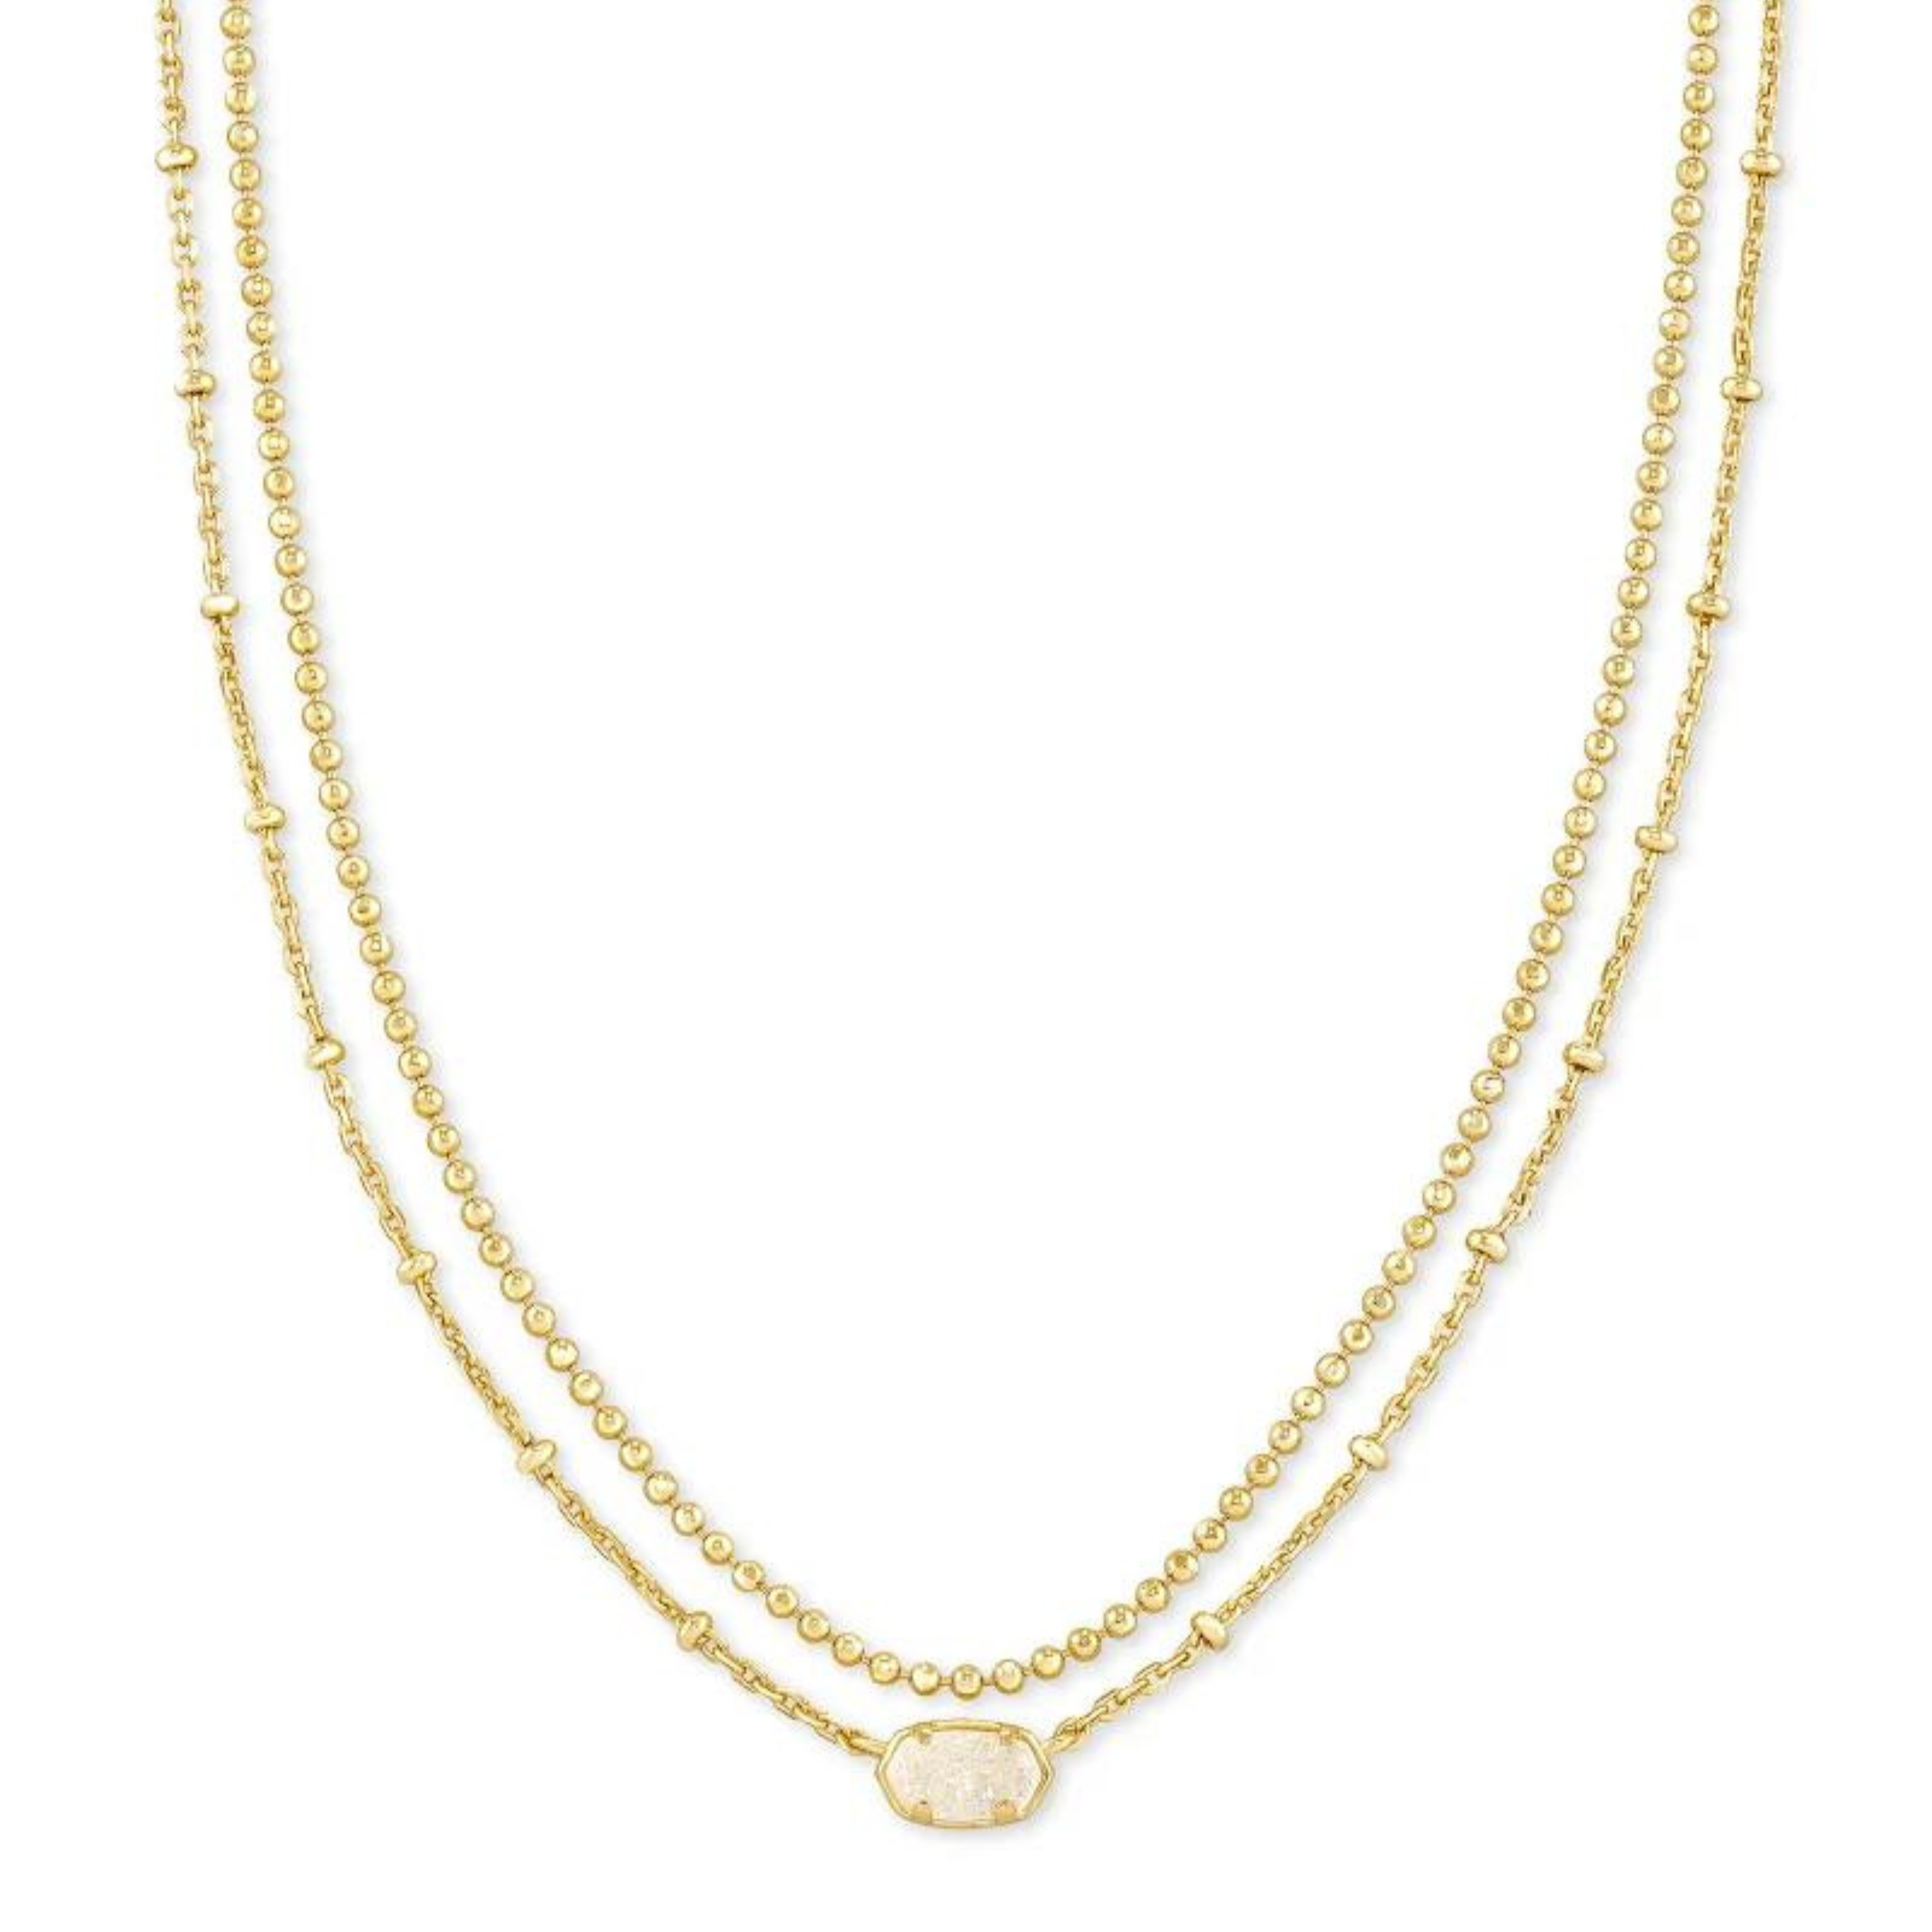 Thin, double gold necklace with small, oval drusy pendant pictured on a white background. 